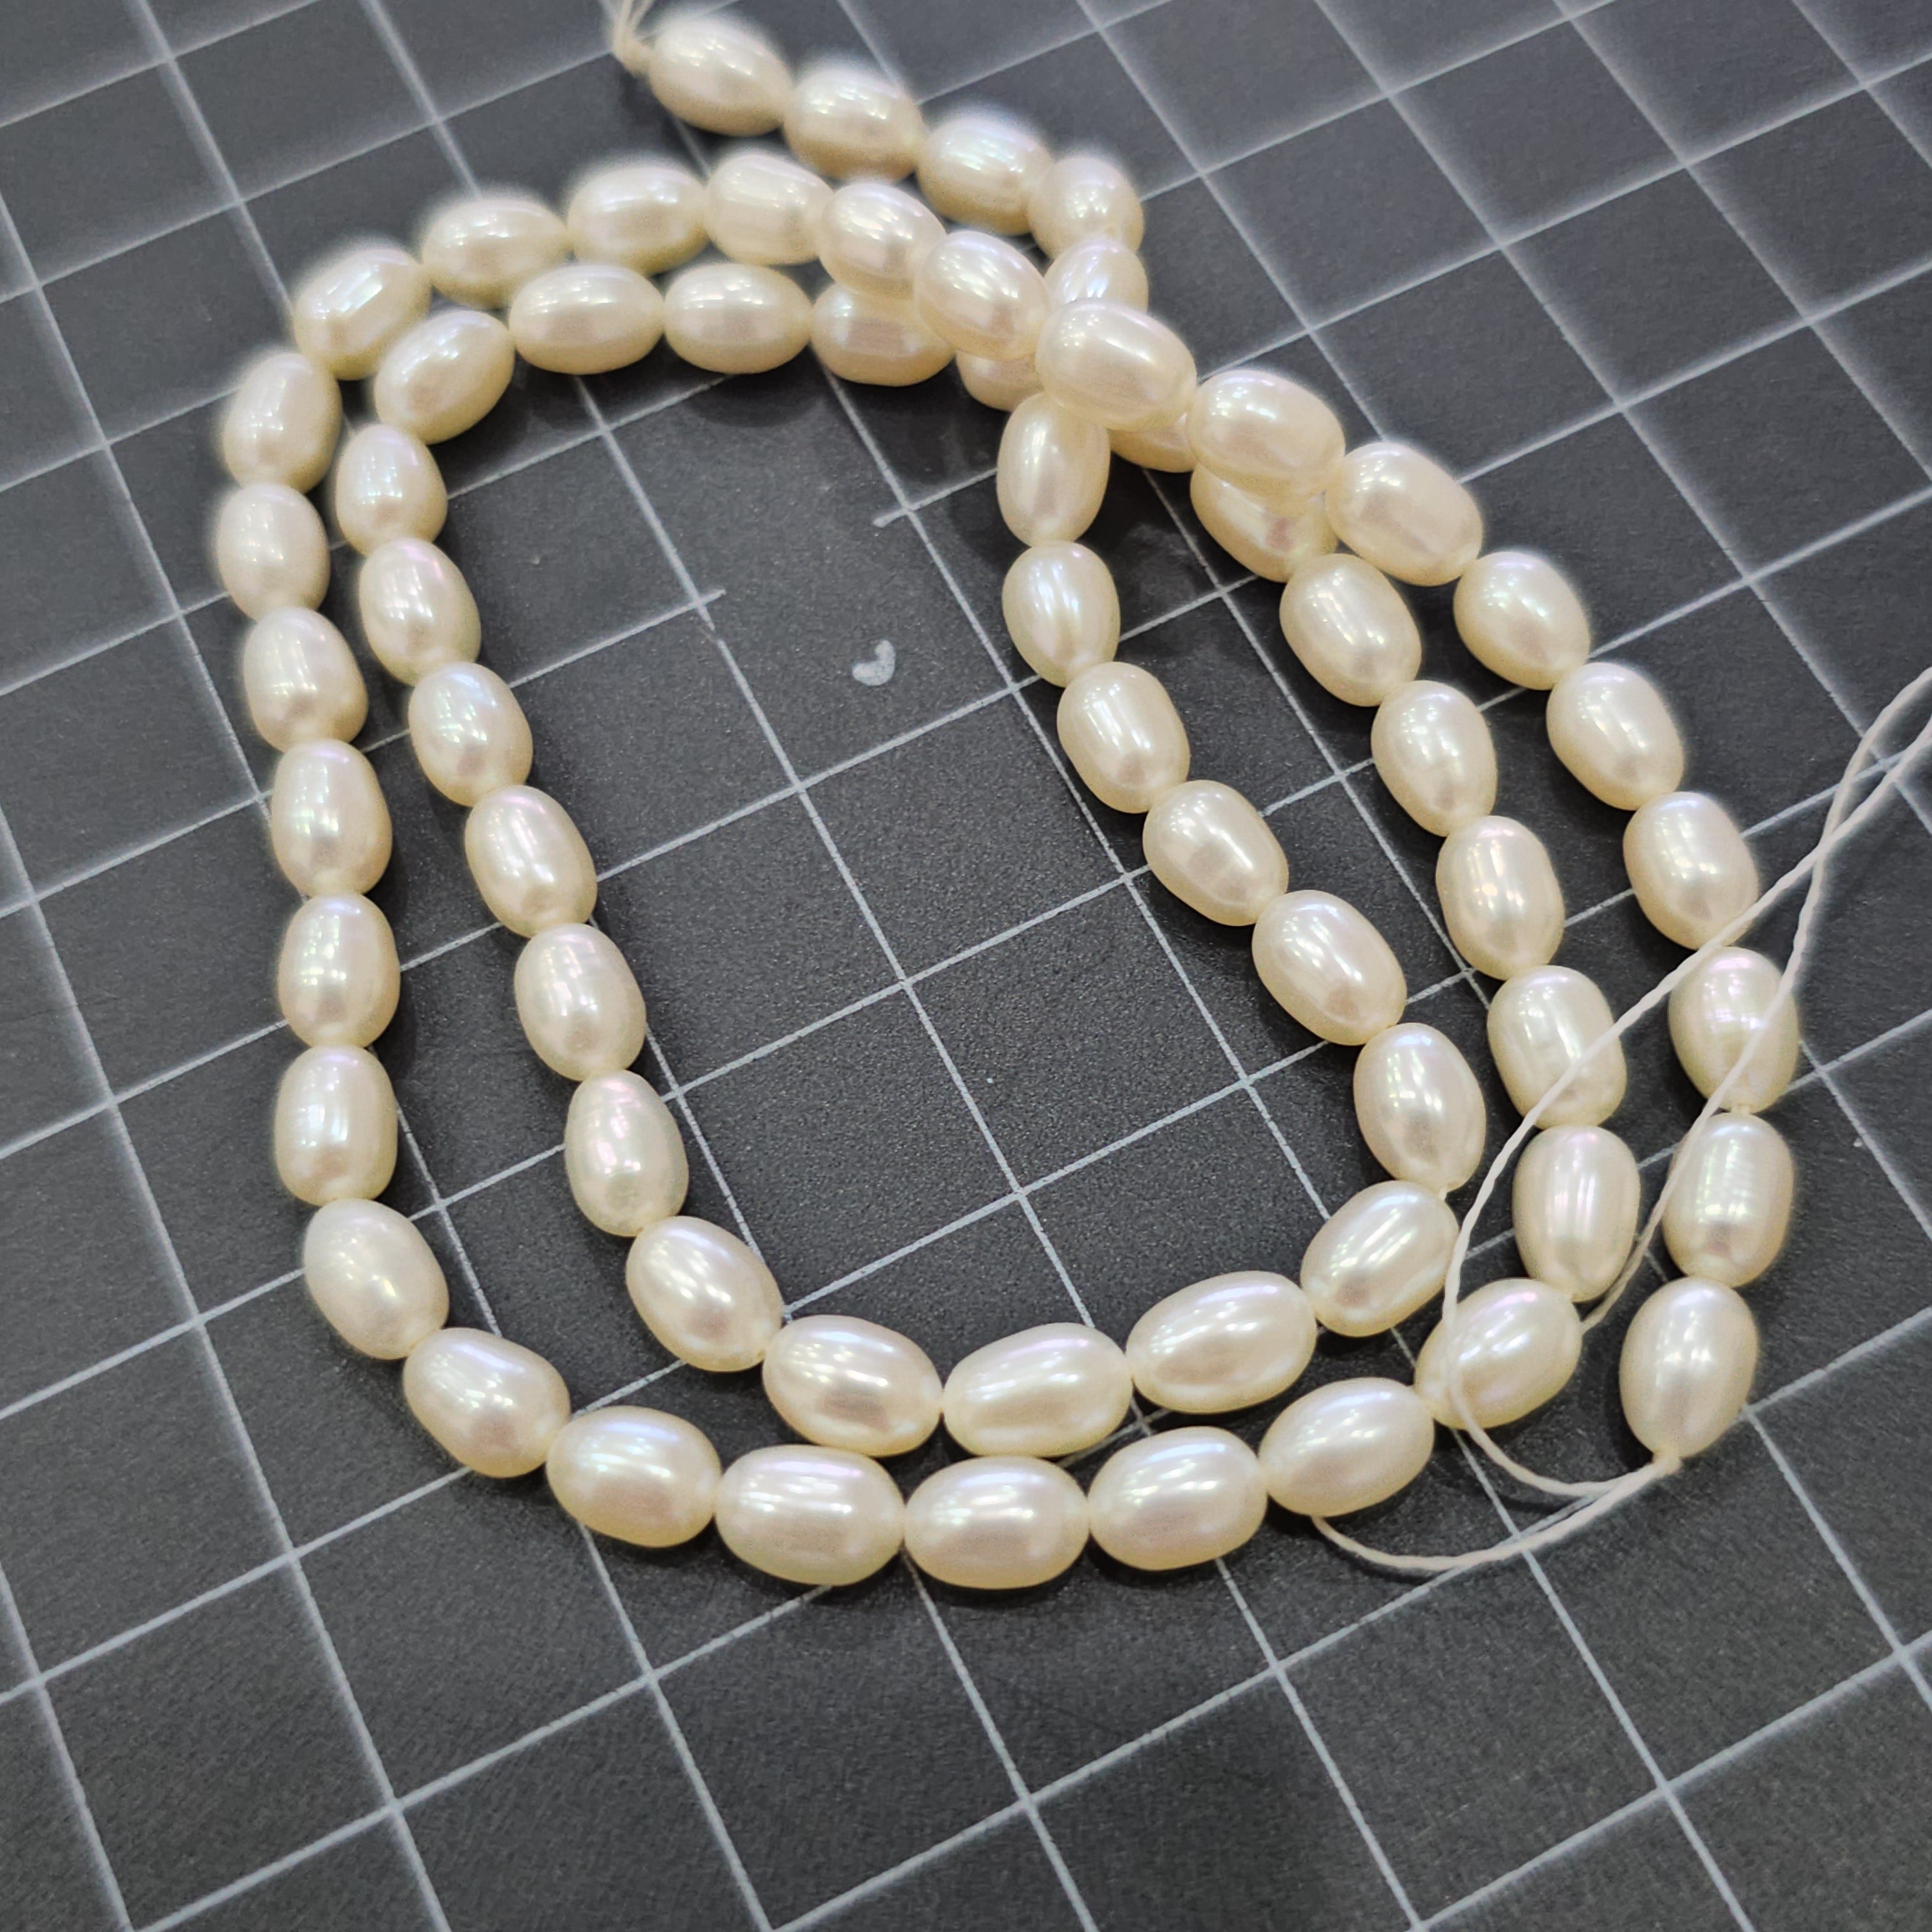 16 Inches Of Natural Pearl Oval Shape Gemstone Beads Size 7x5mm - The LabradoriteKing